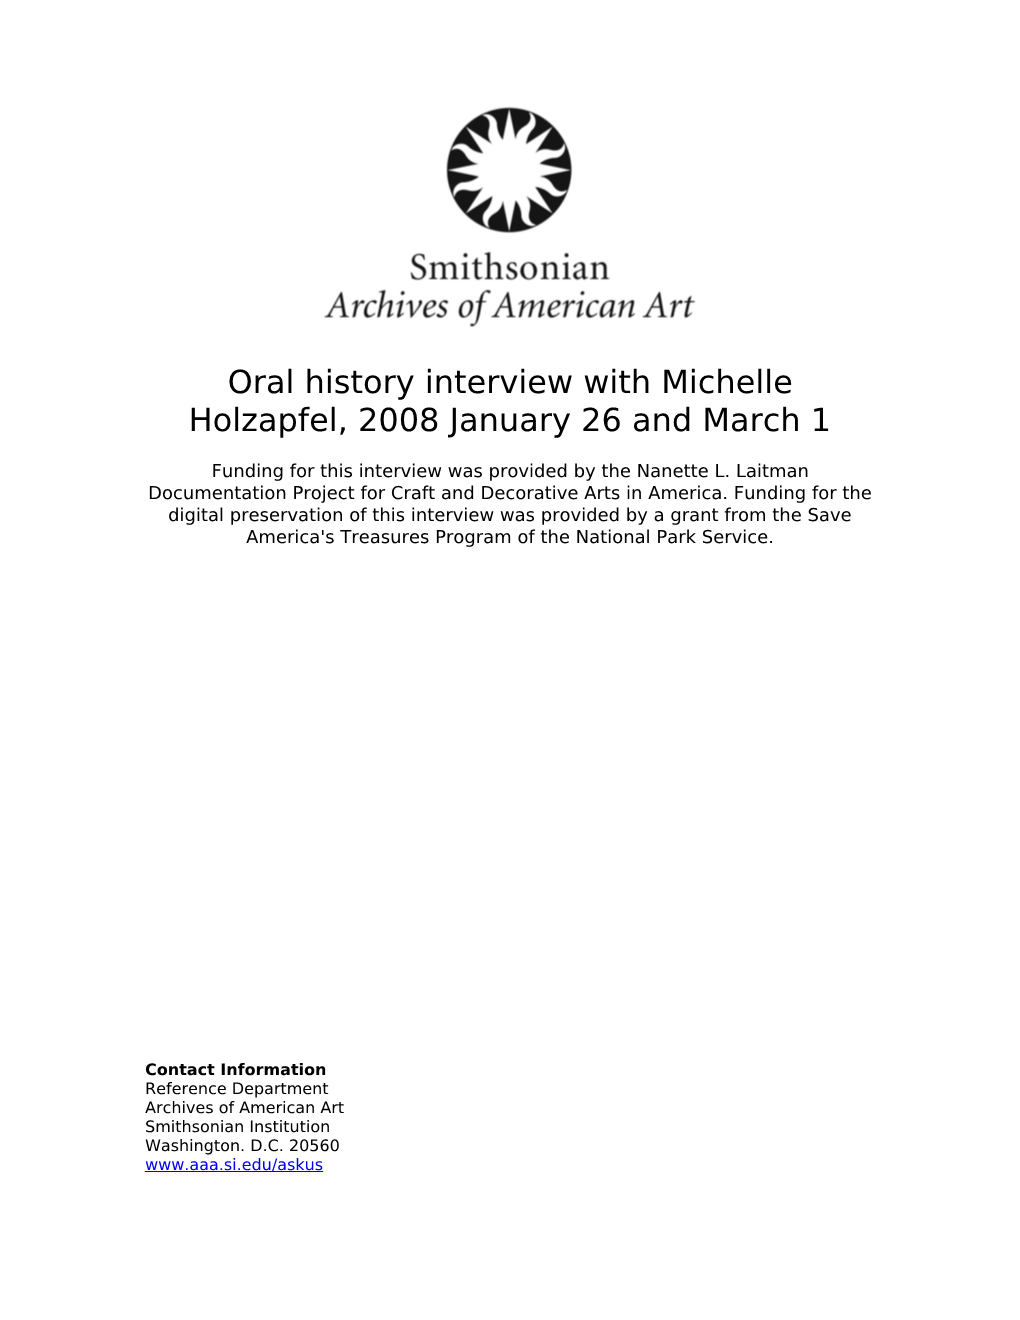 Oral History Interview with Michelle Holzapfel, 2008 January 26 and March 1